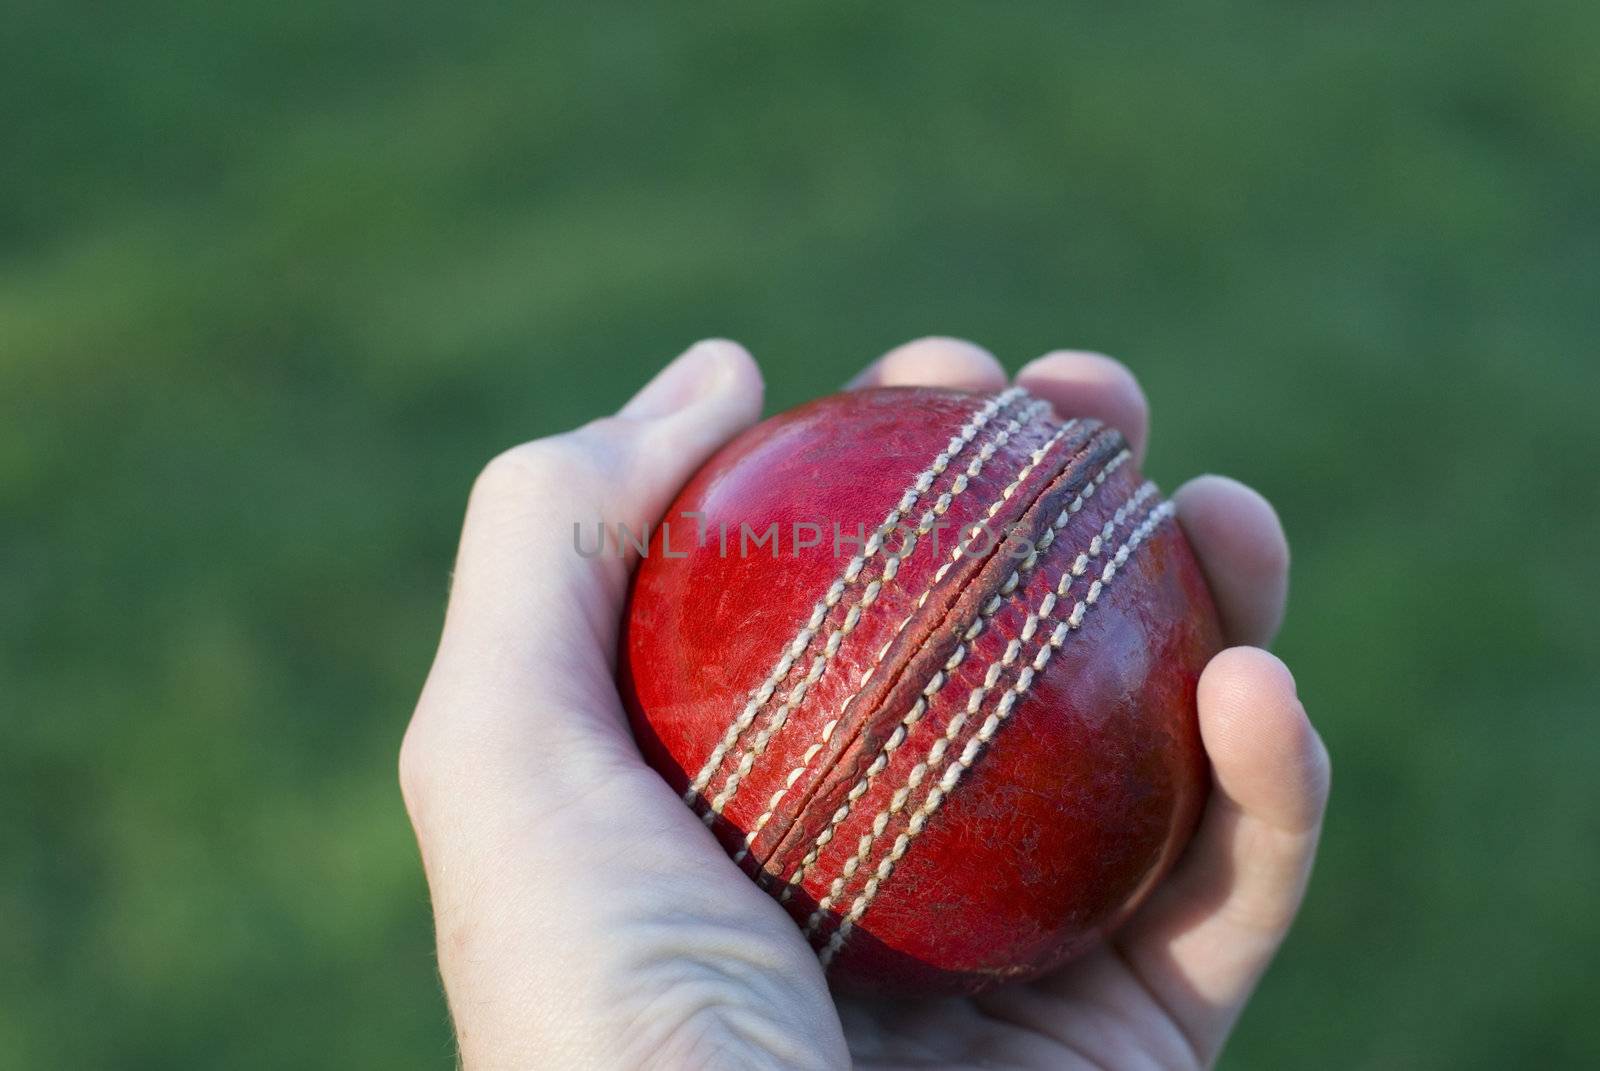 Bowler's hand holding a red cricket ball over green grass.